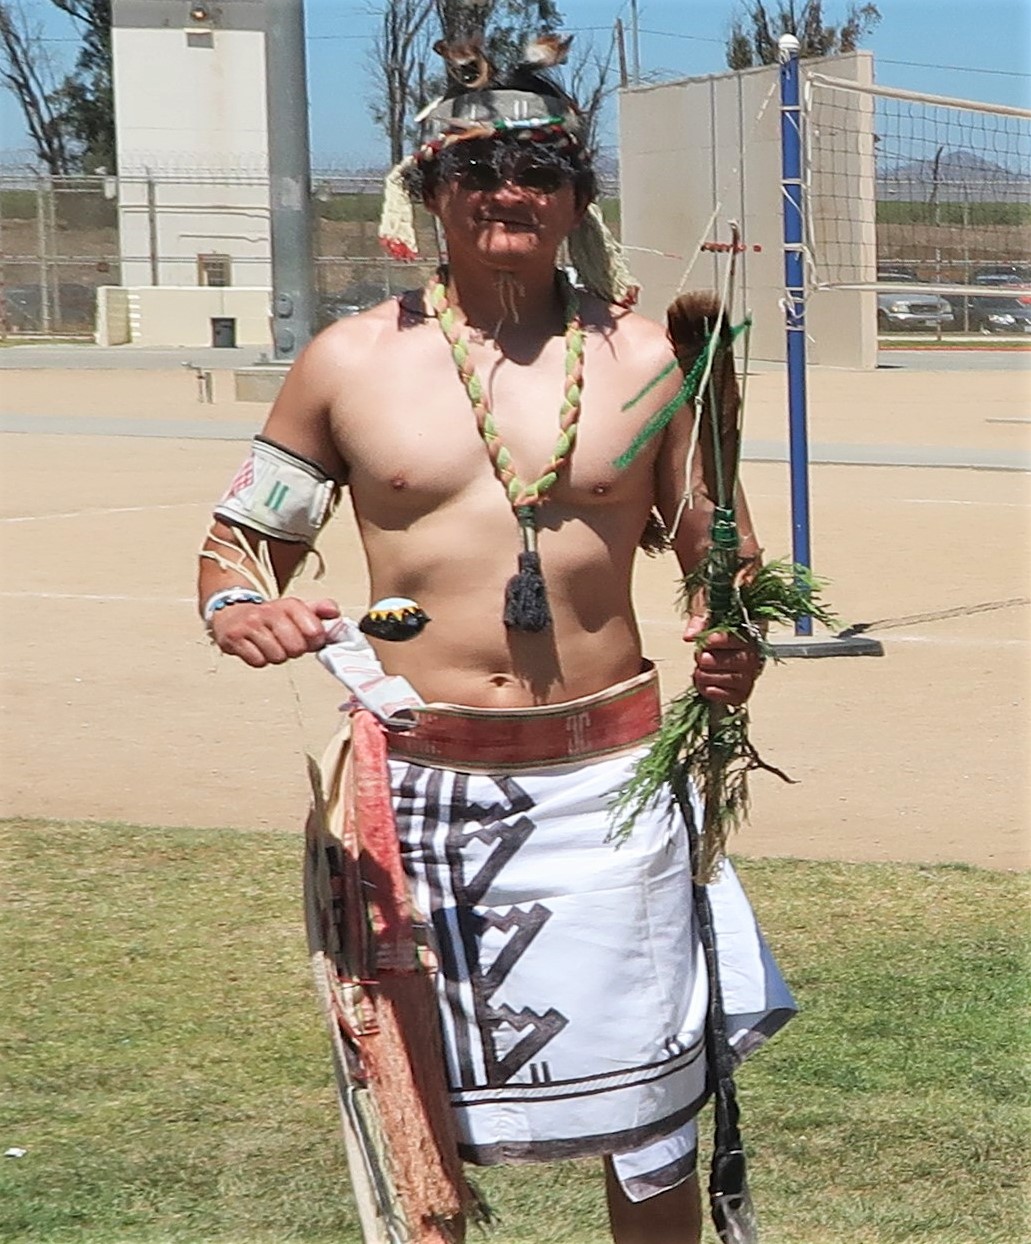 Man wearing traditional Native American clothing.